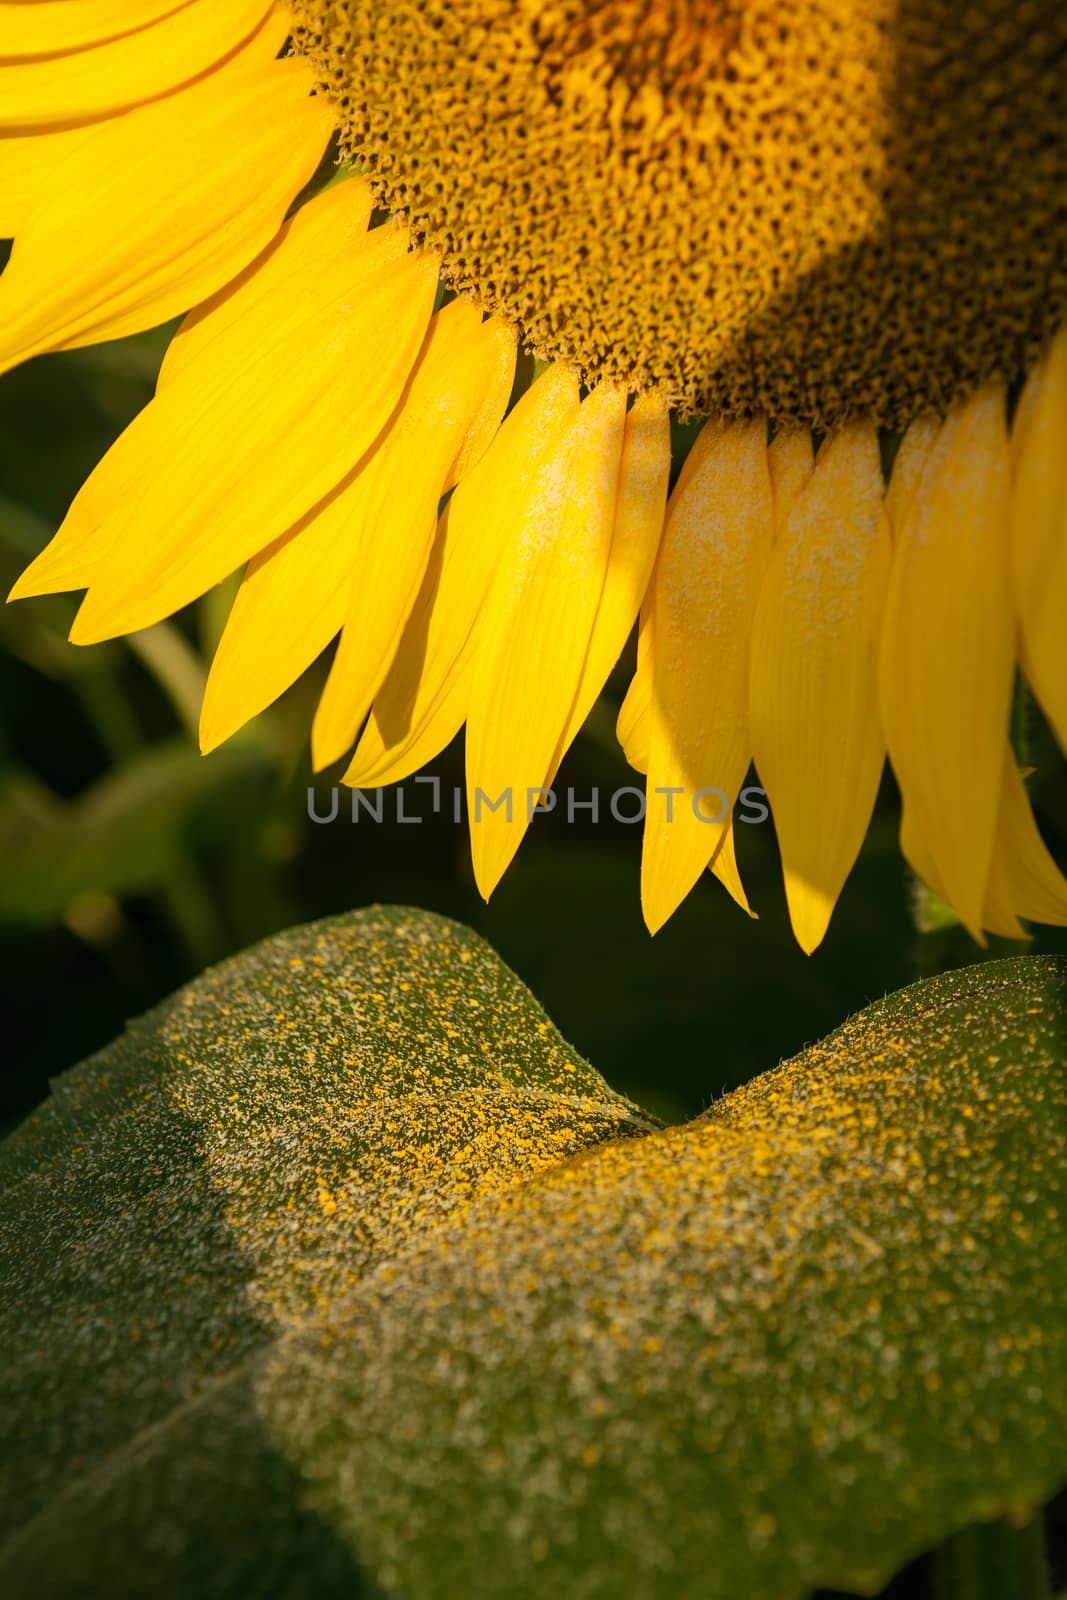 Close up of a sunflower by LuigiMorbidelli